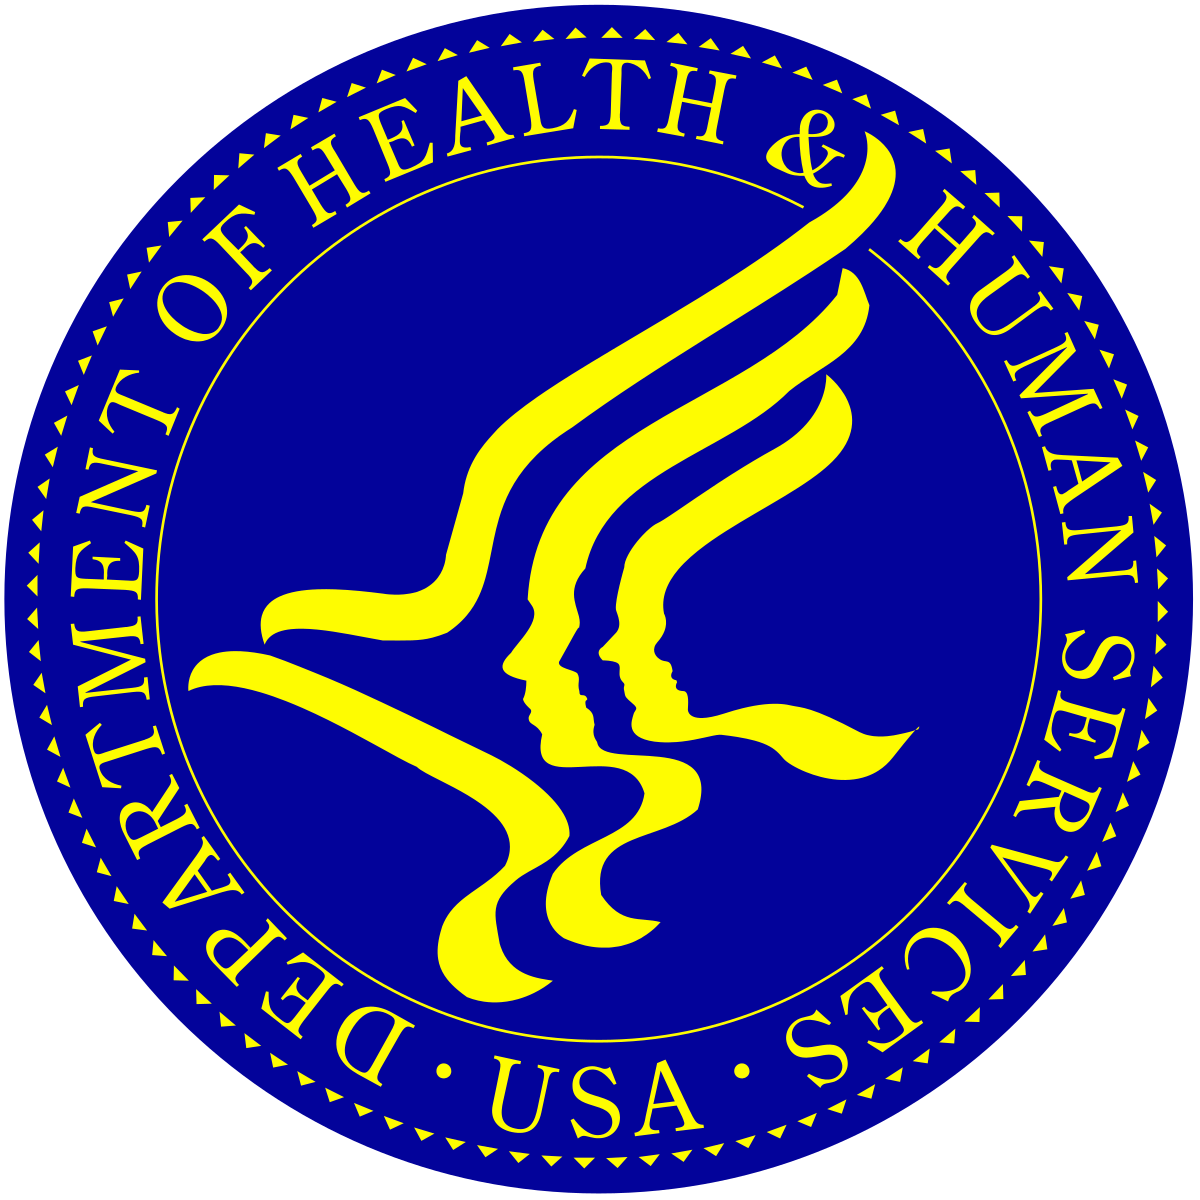 Official seal for the Department of Health & Human Services (HHS)